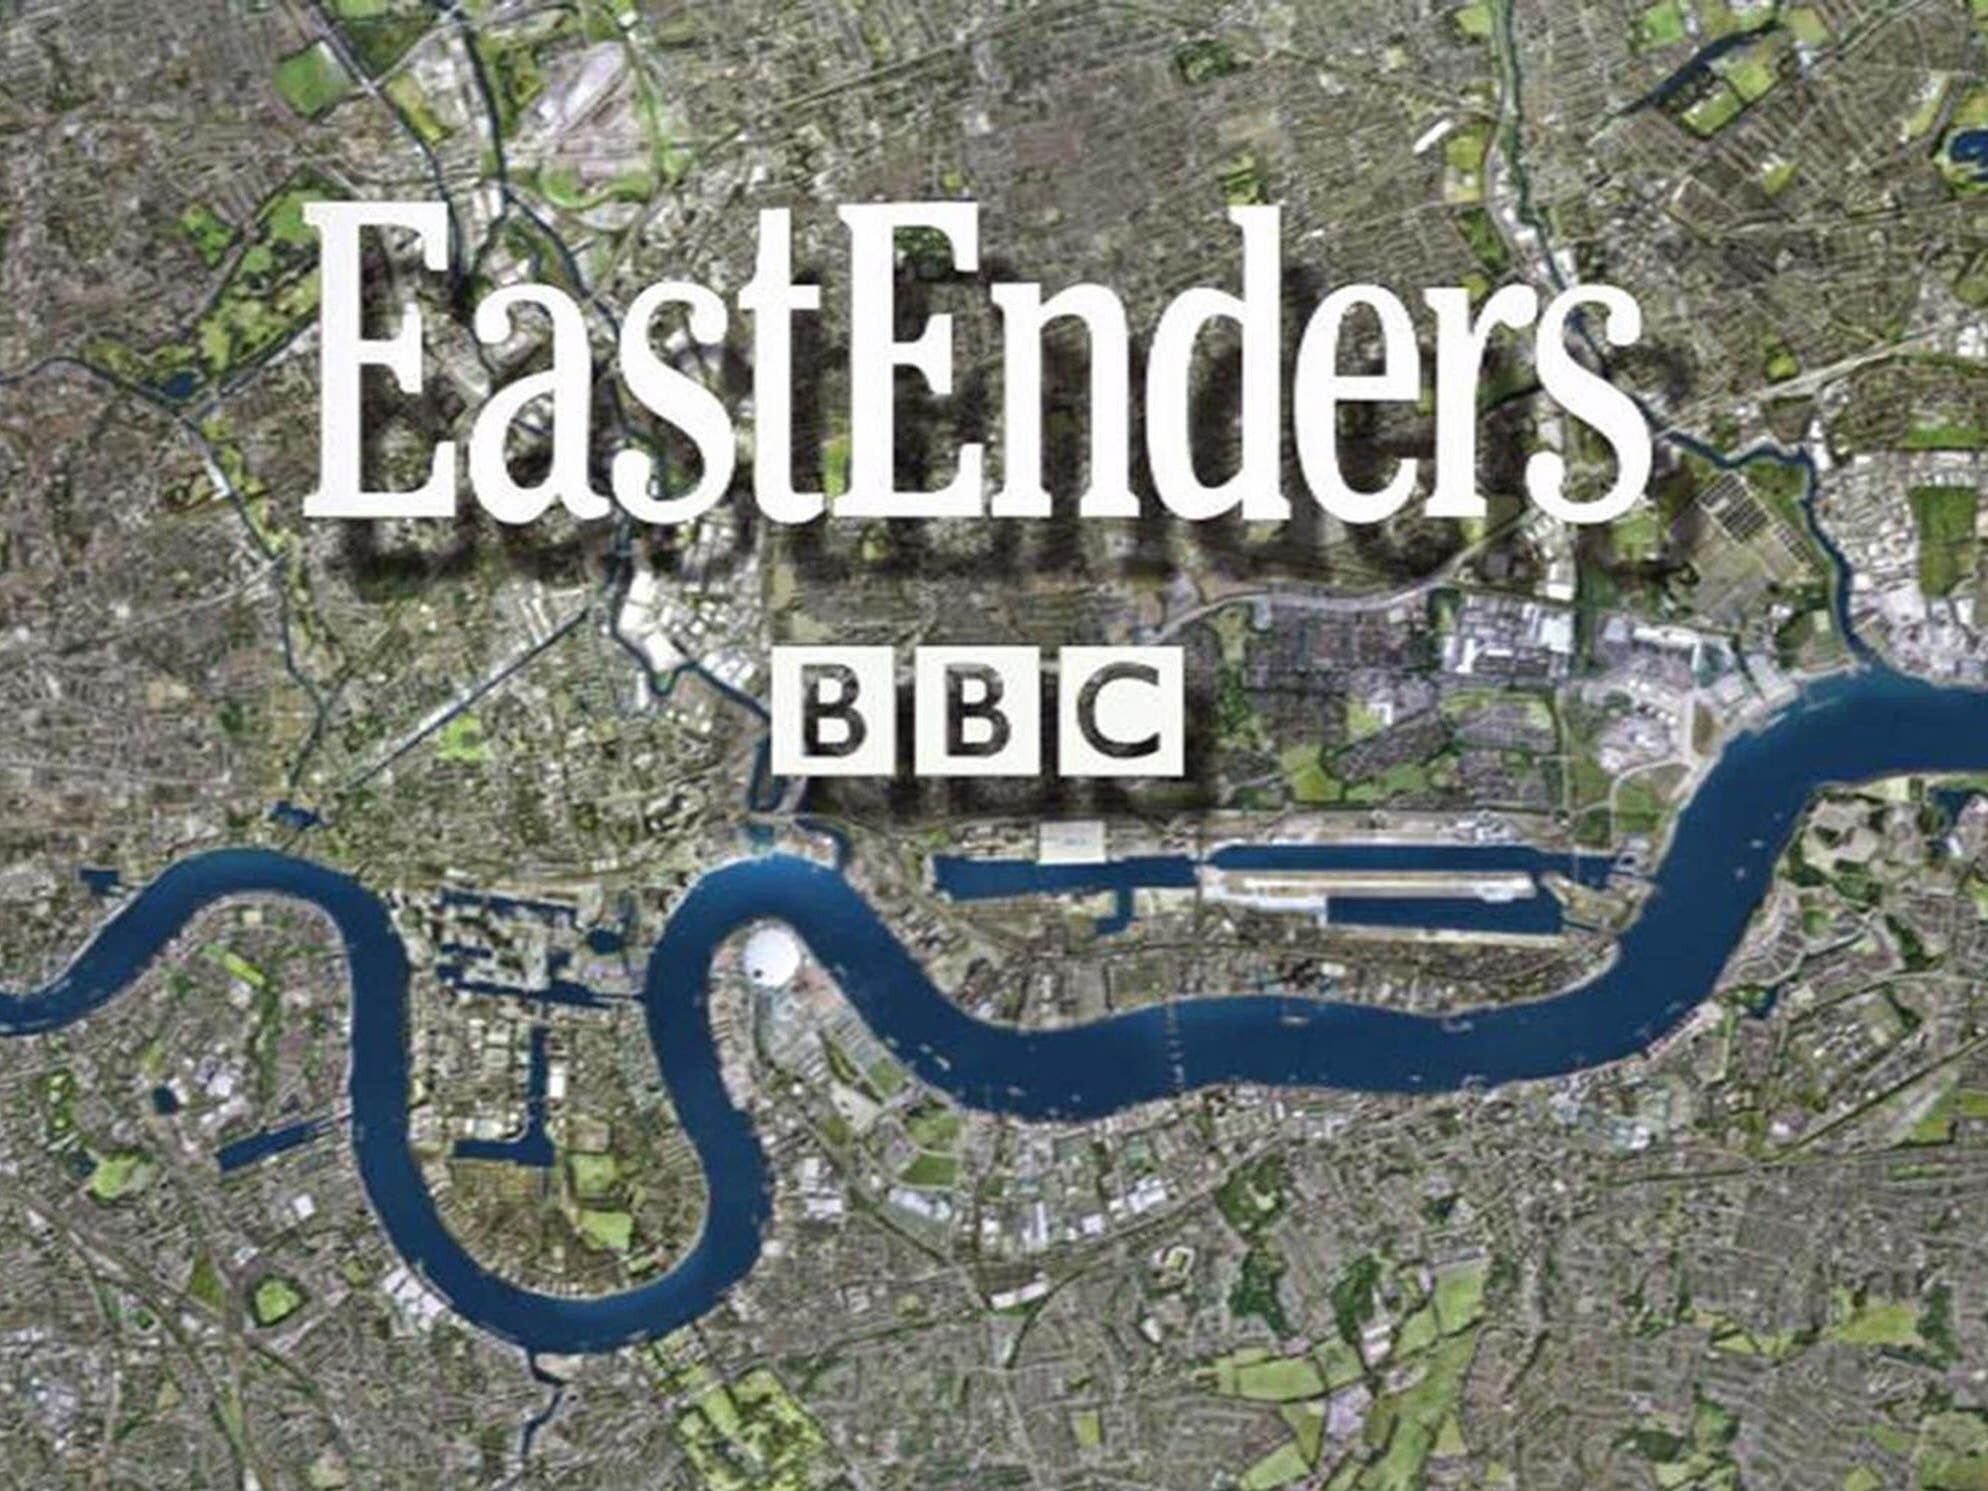 EastEnders likens Queen’s death to Britain ‘losing its nan’ in touching tribute